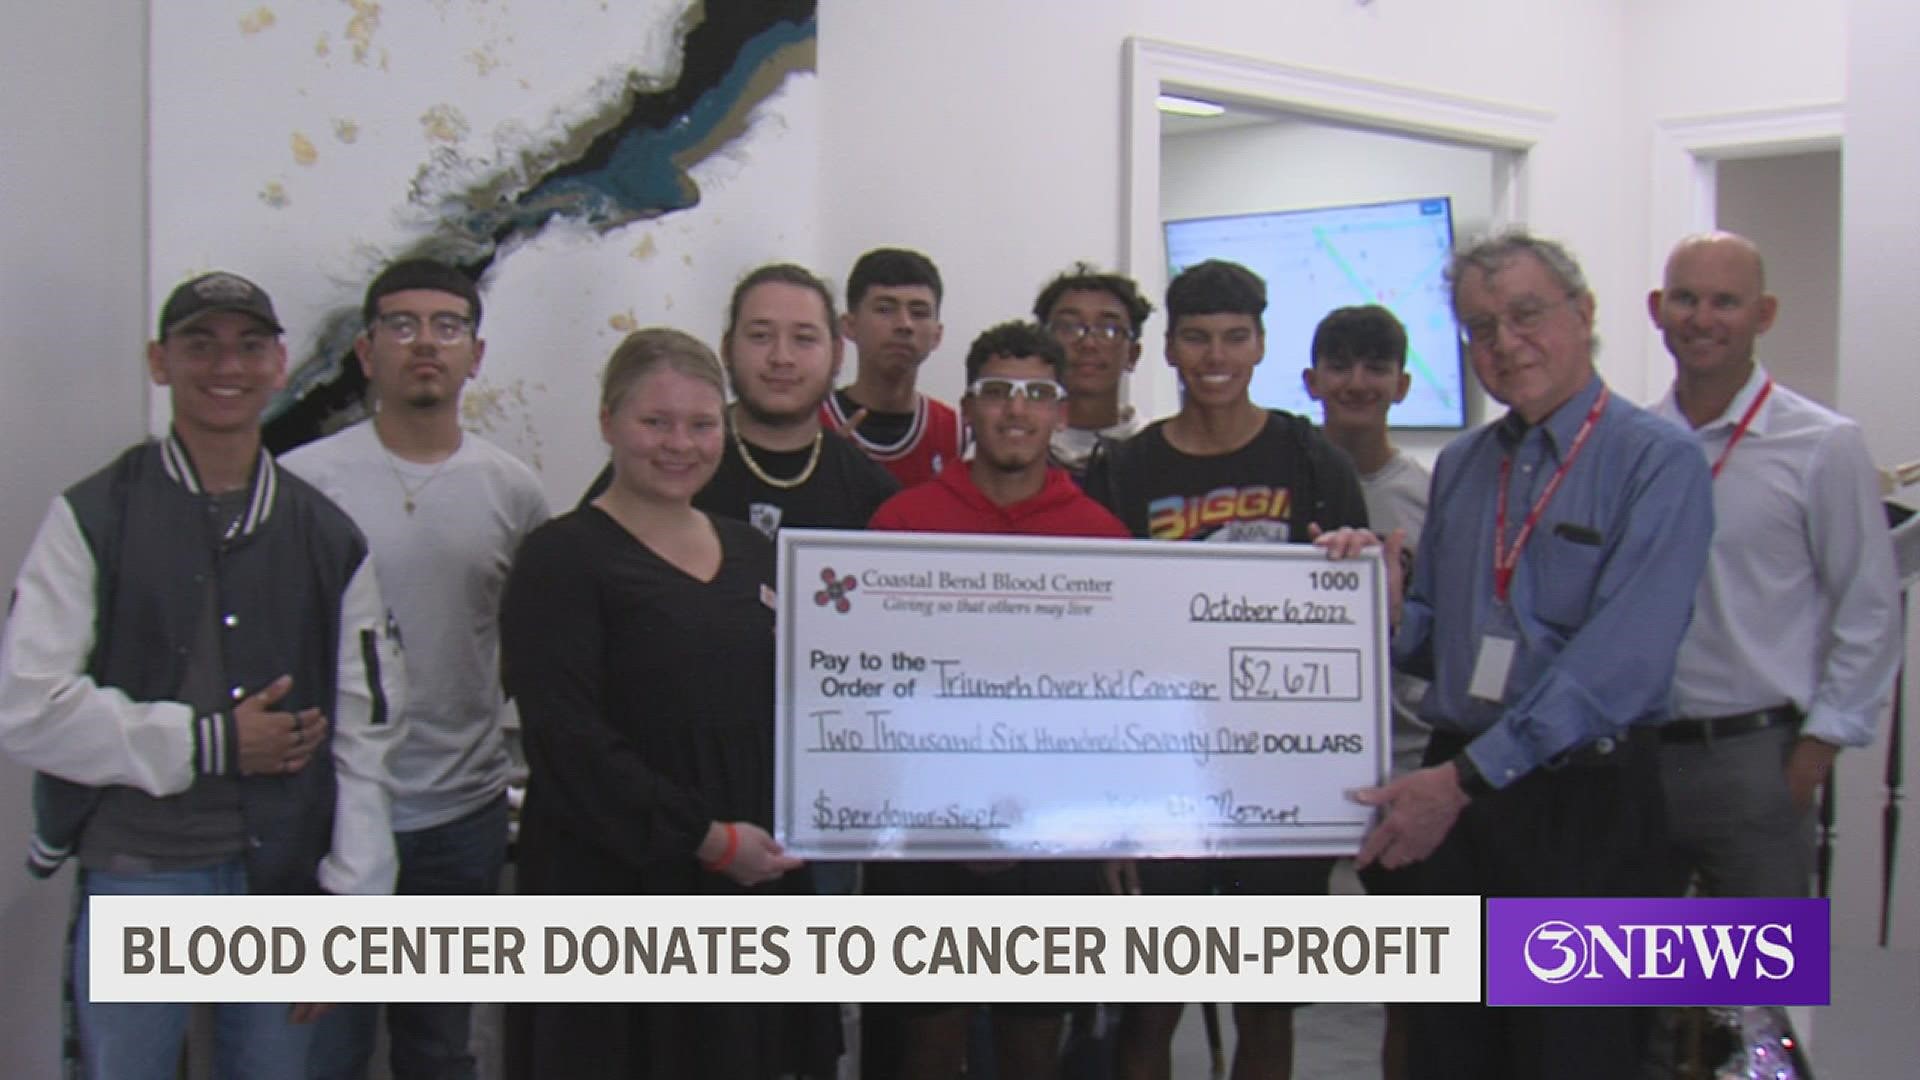 The Coastal Bend Blood Center donated more than $2,600 to to fellow non-profit Triumph Over Kid Cancer.